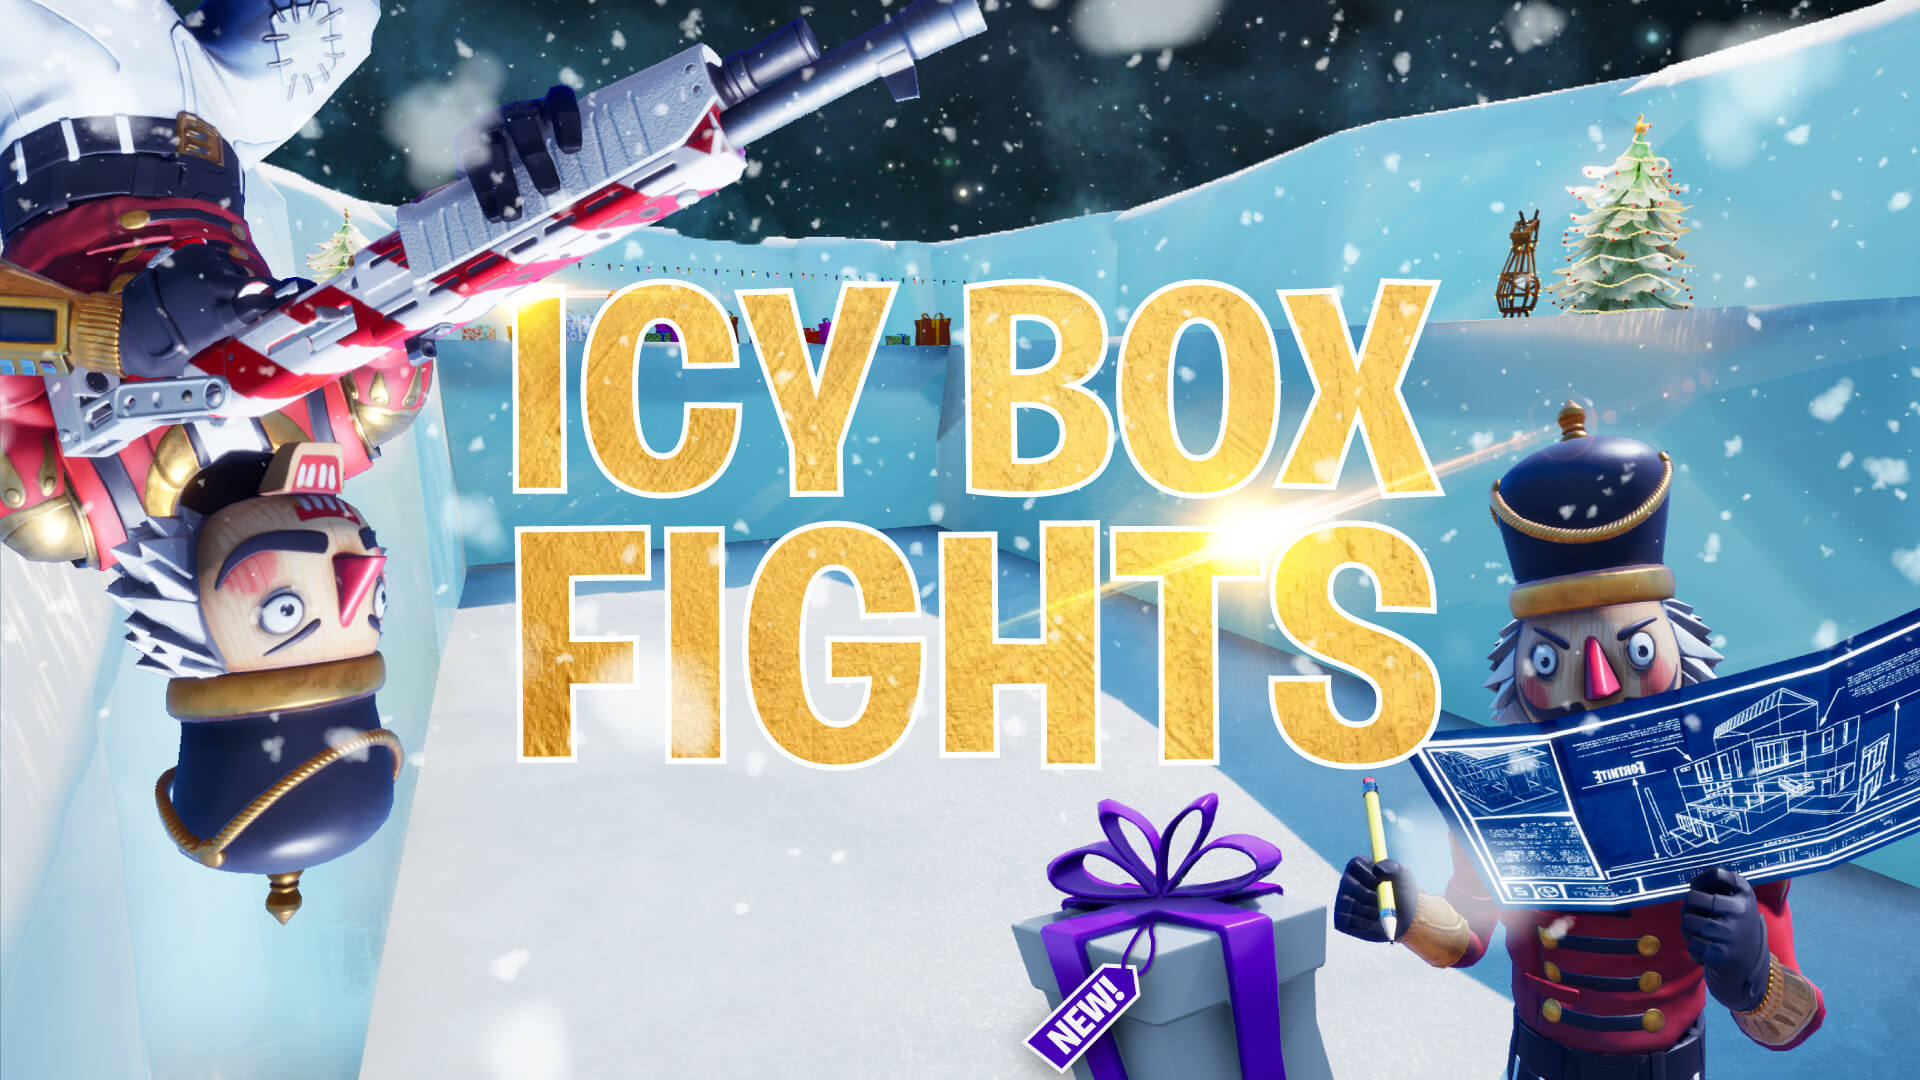 ICY BOX FIGHTS